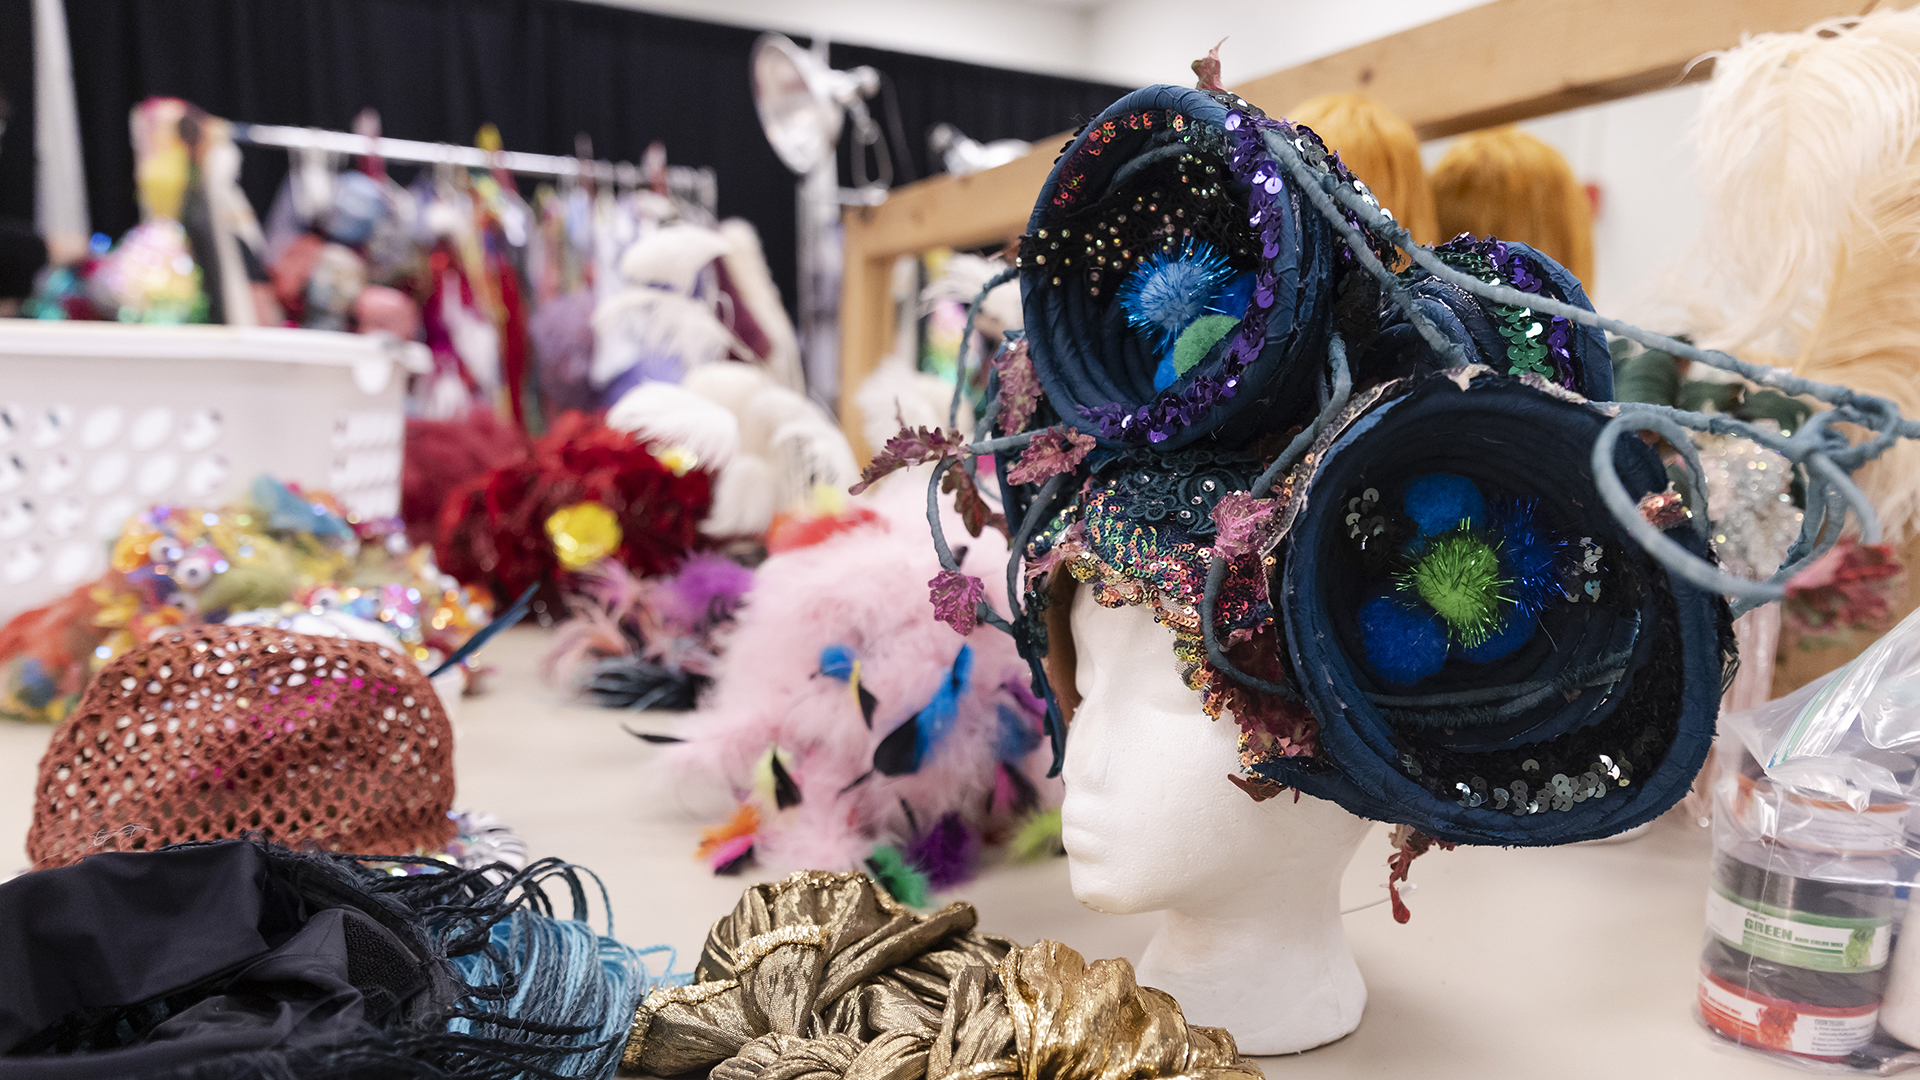 A table of costumes and other materials, including a wig made of two giant blue-green circles in the basic shape of birds' nests, made by Machine Dazzle